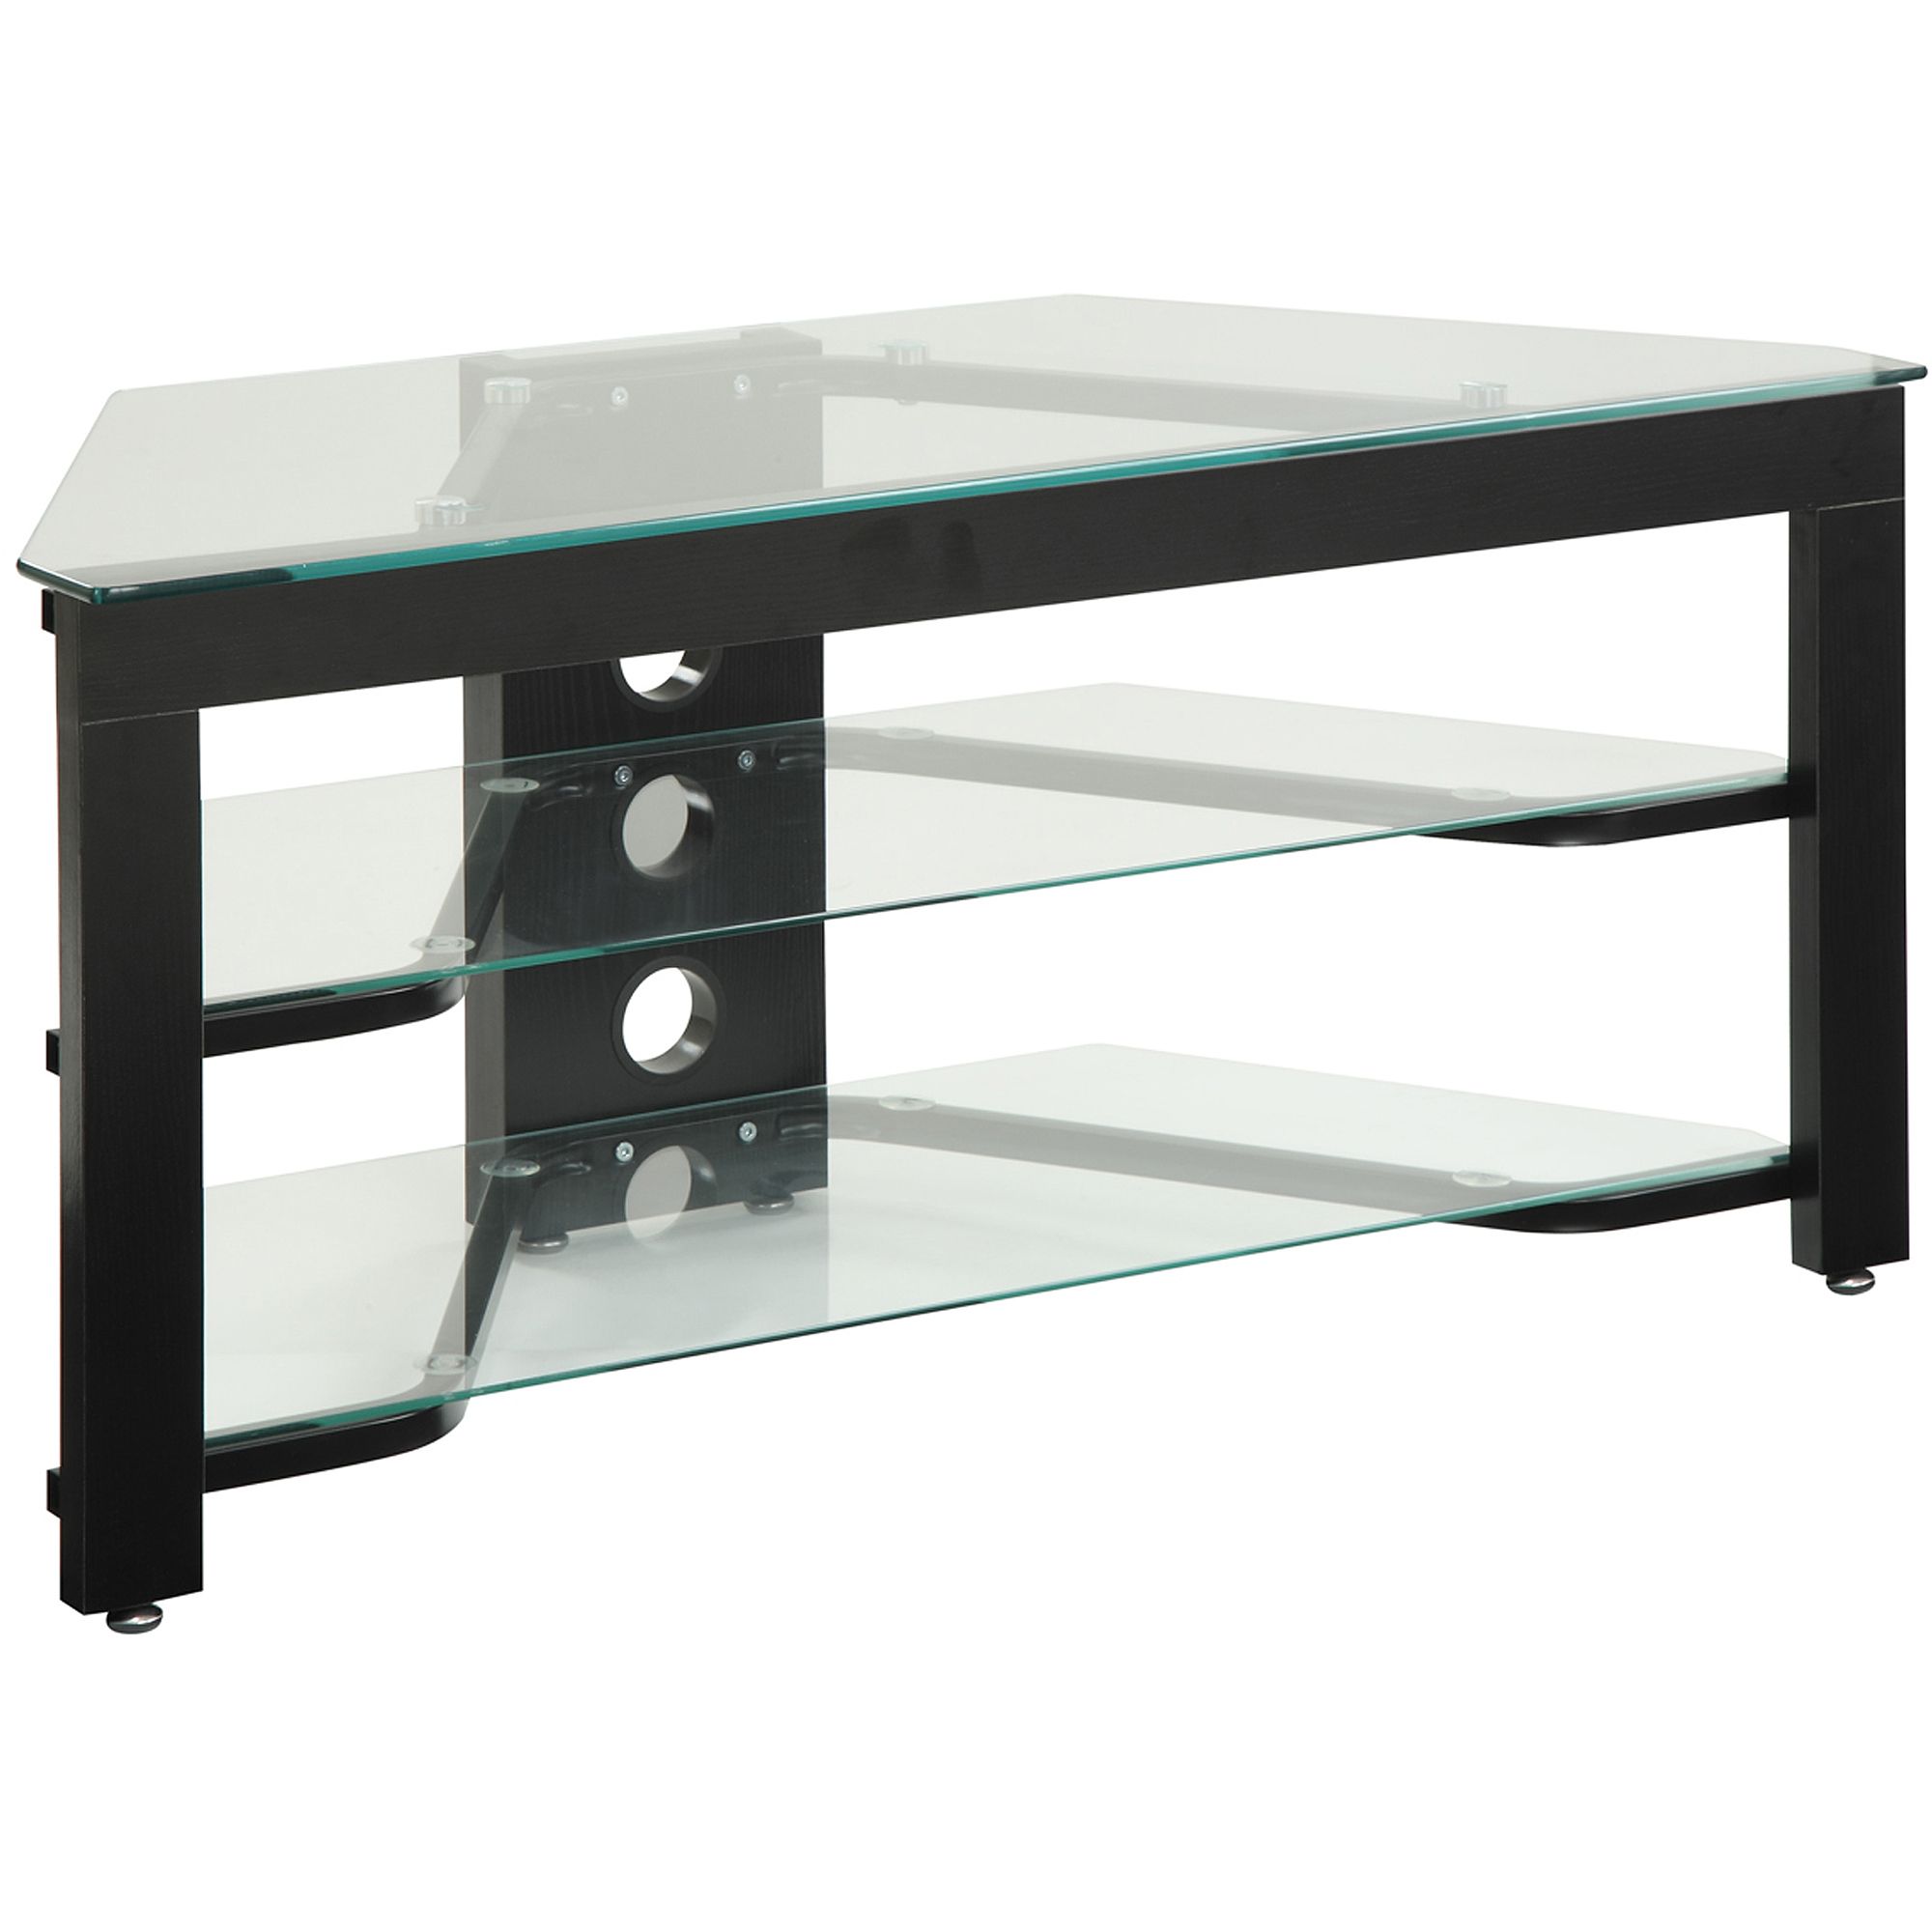 Convenience Concepts Designs2go Wood And Glass Tv Stand With Glass Shelves Tv Stands For Tvs Up To 65" (Gallery 20 of 20)